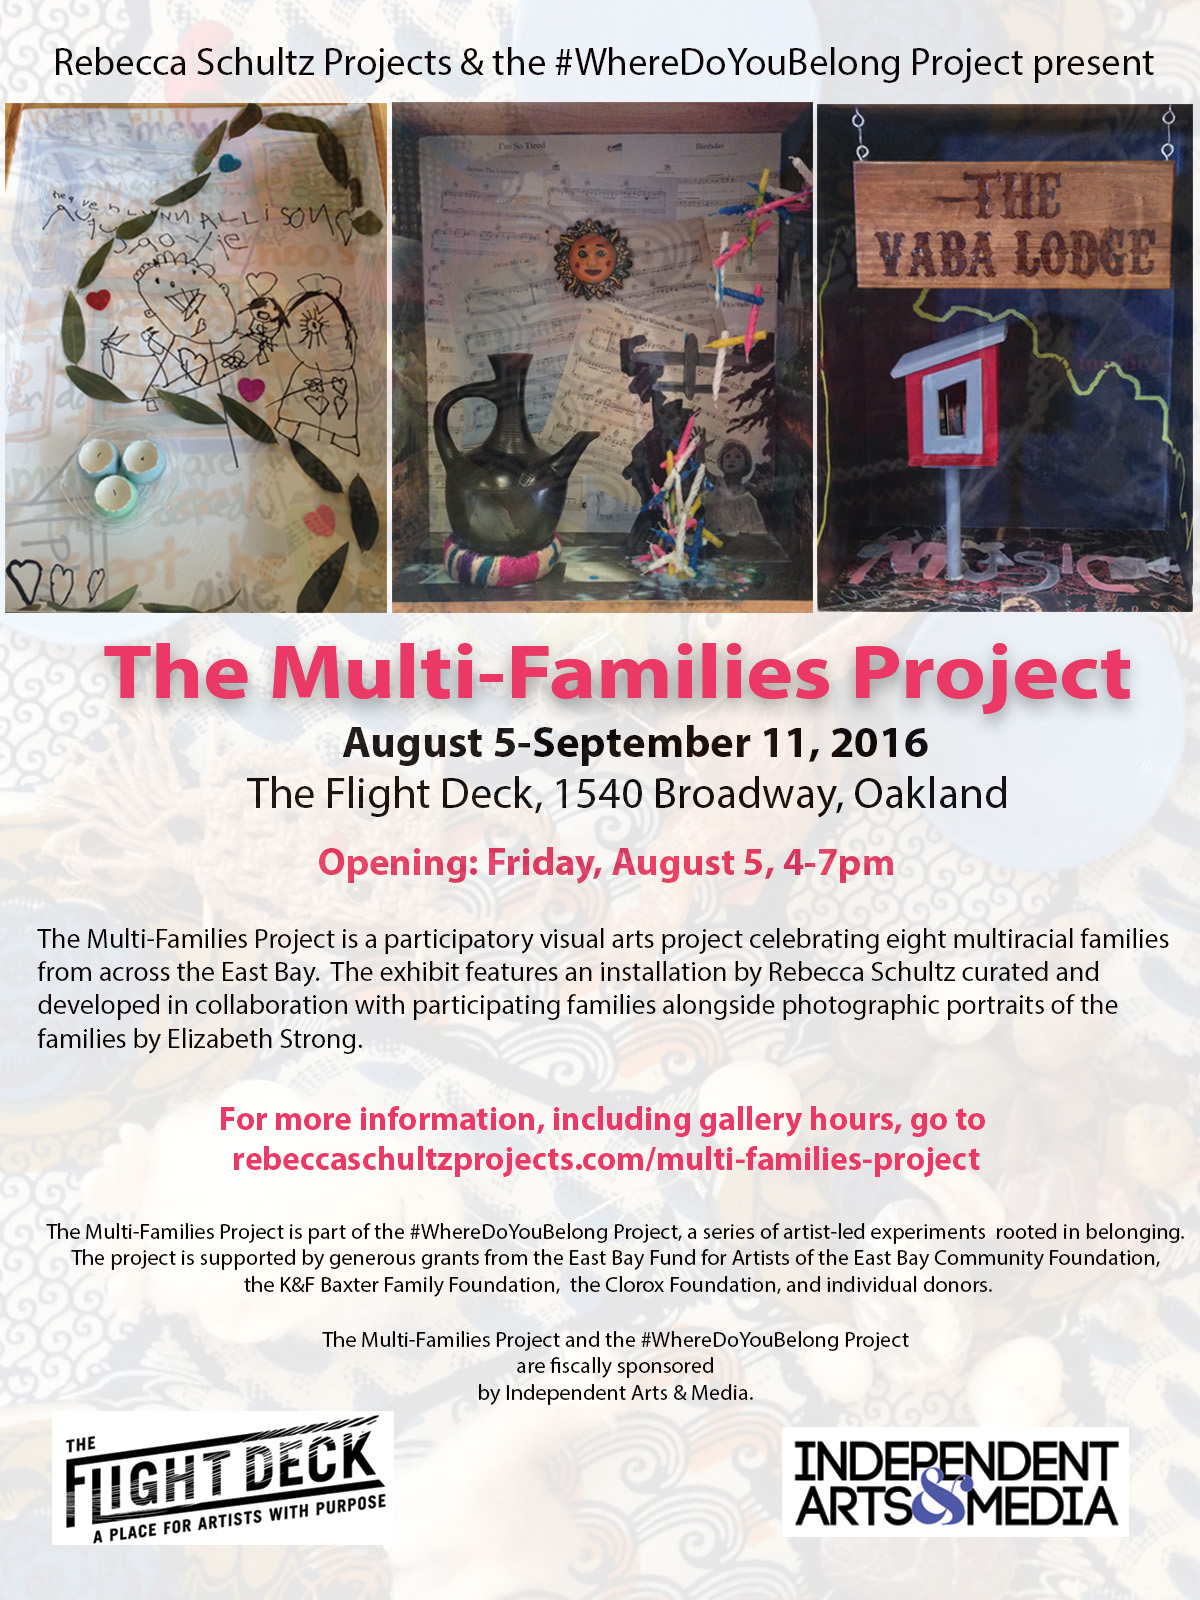 The Multi-Families Project exhibition at The Flight Deck, August to September 2016